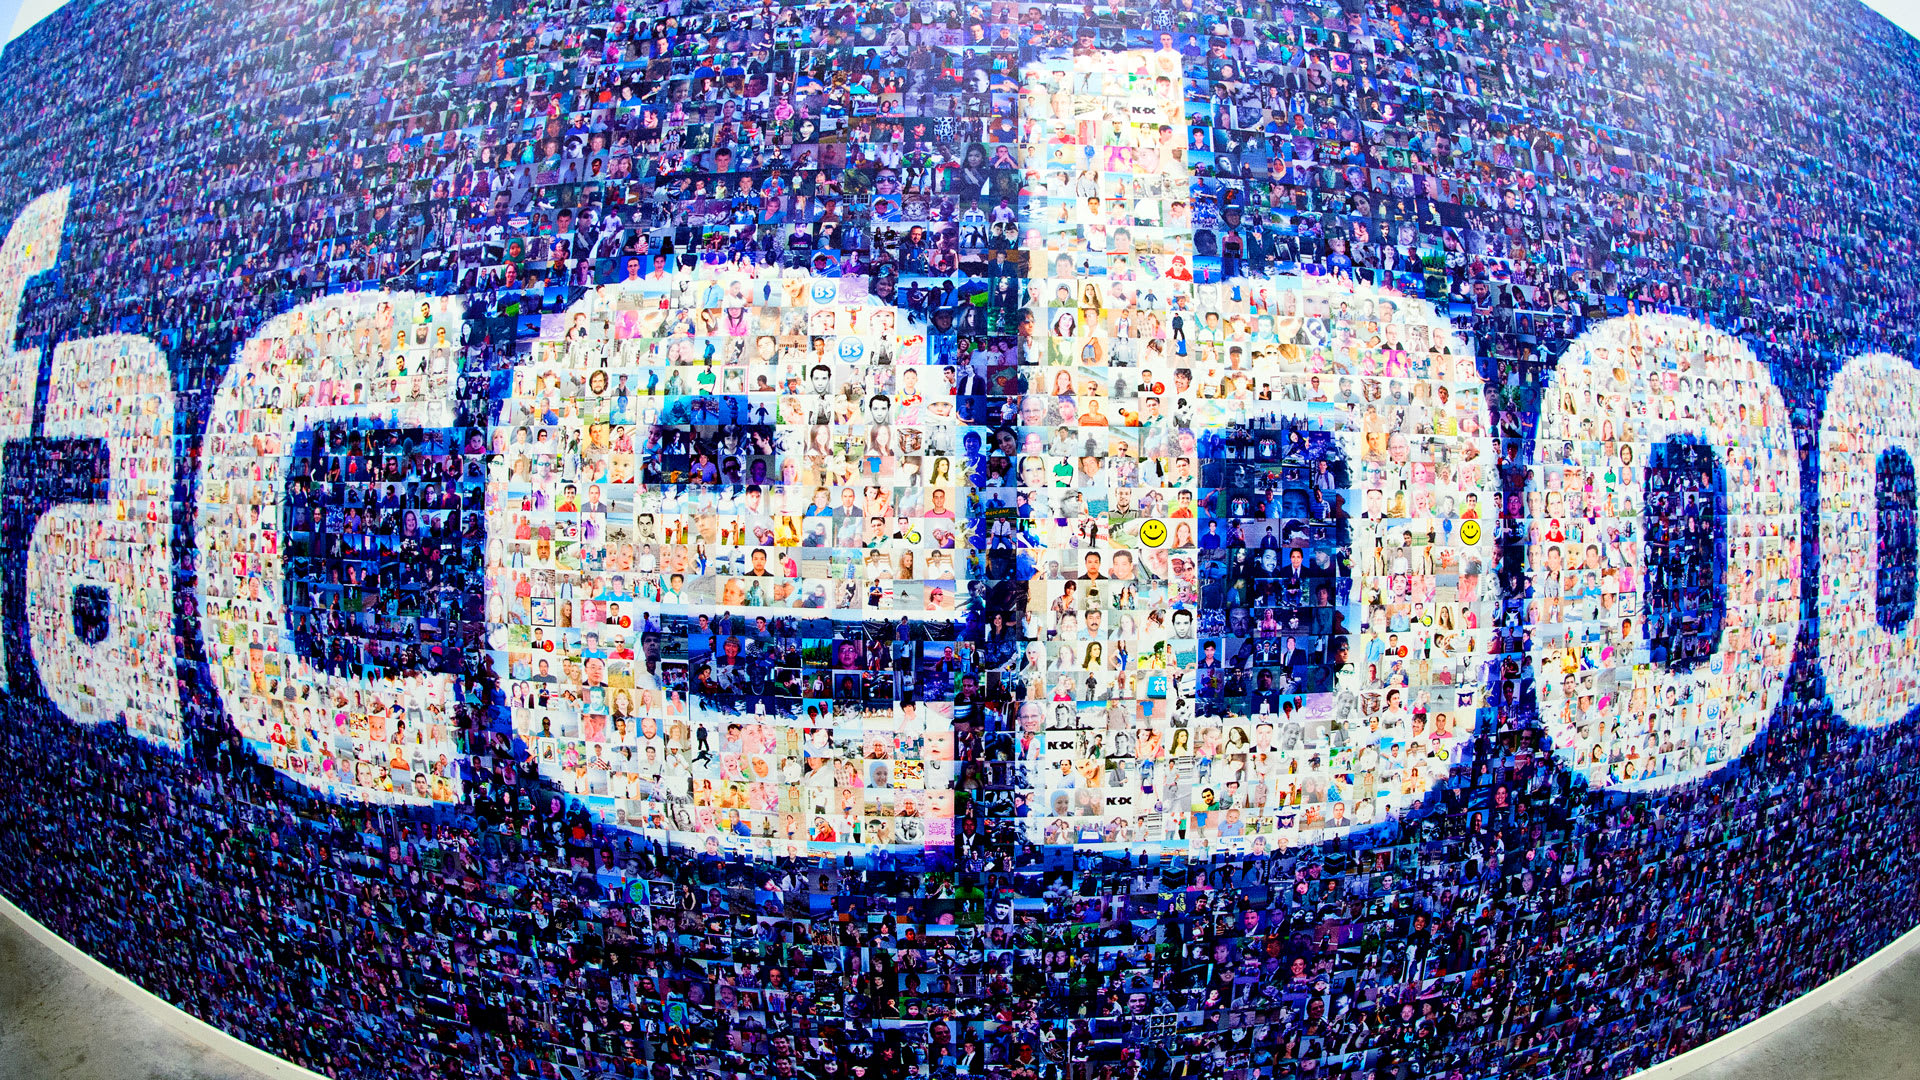 Facebook will no longer let users exclude racial groups in ad targeting